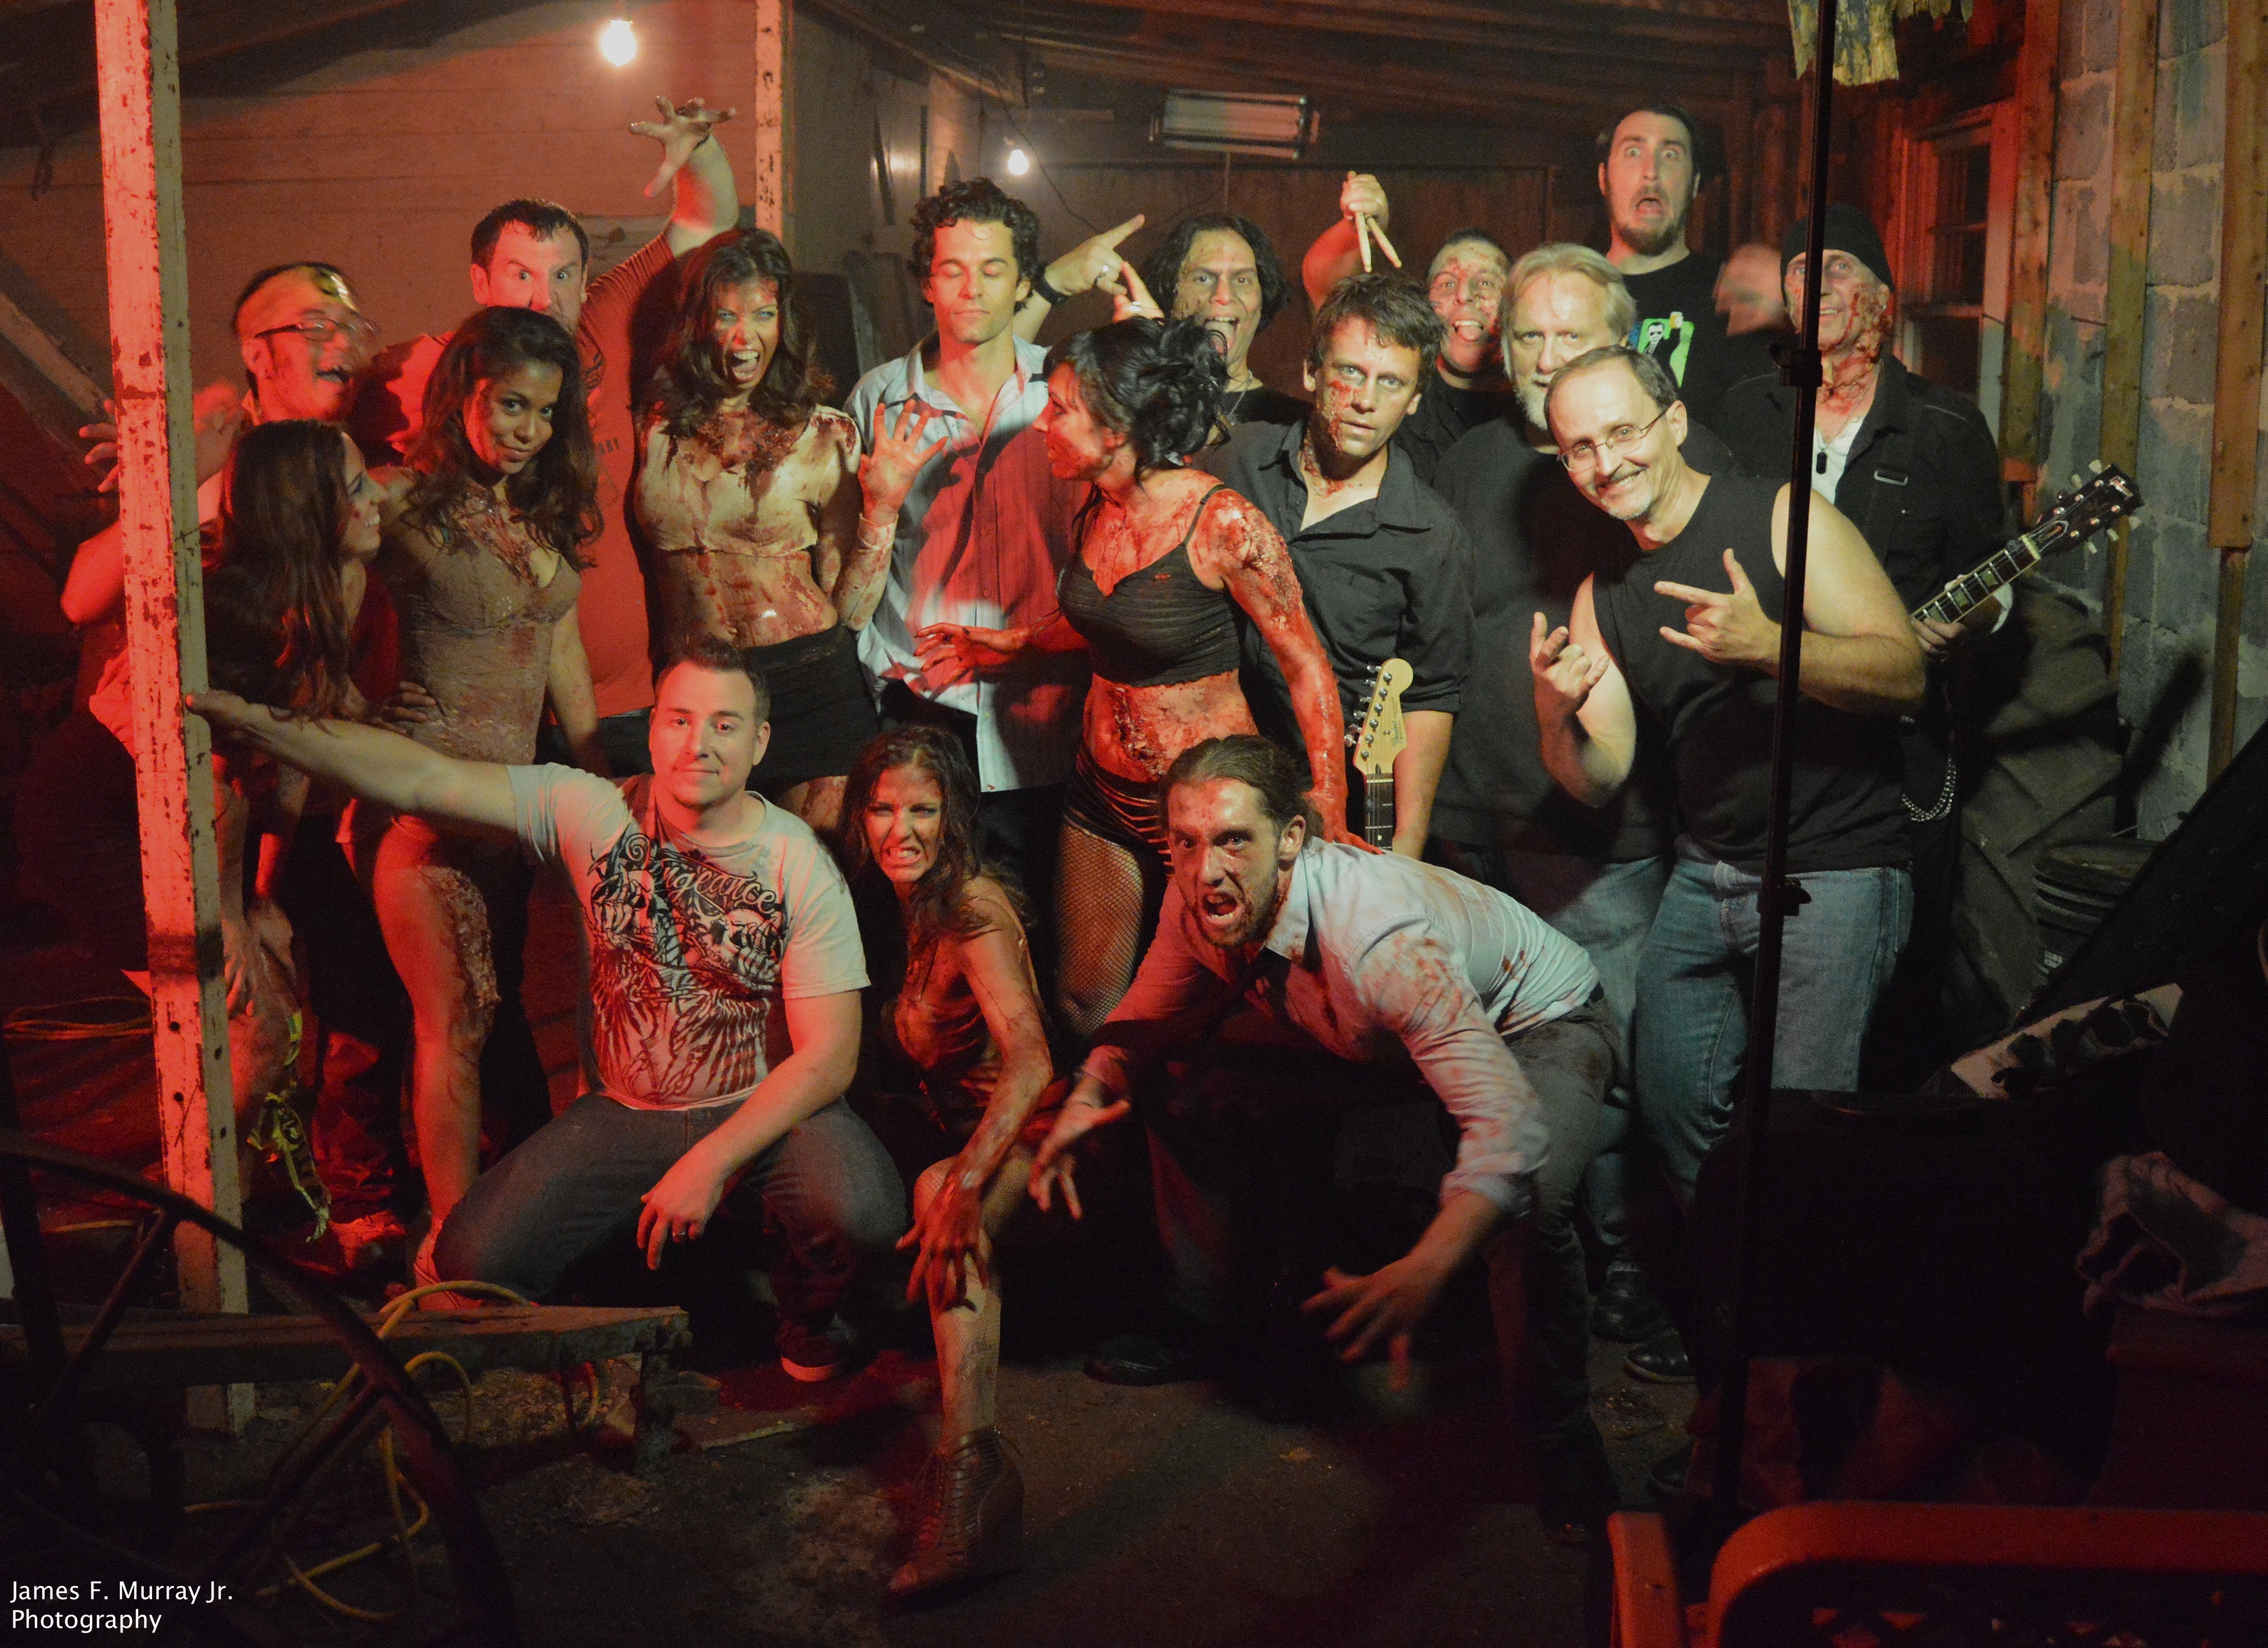 Cast & crew from the music video for the band, SPiN and their 